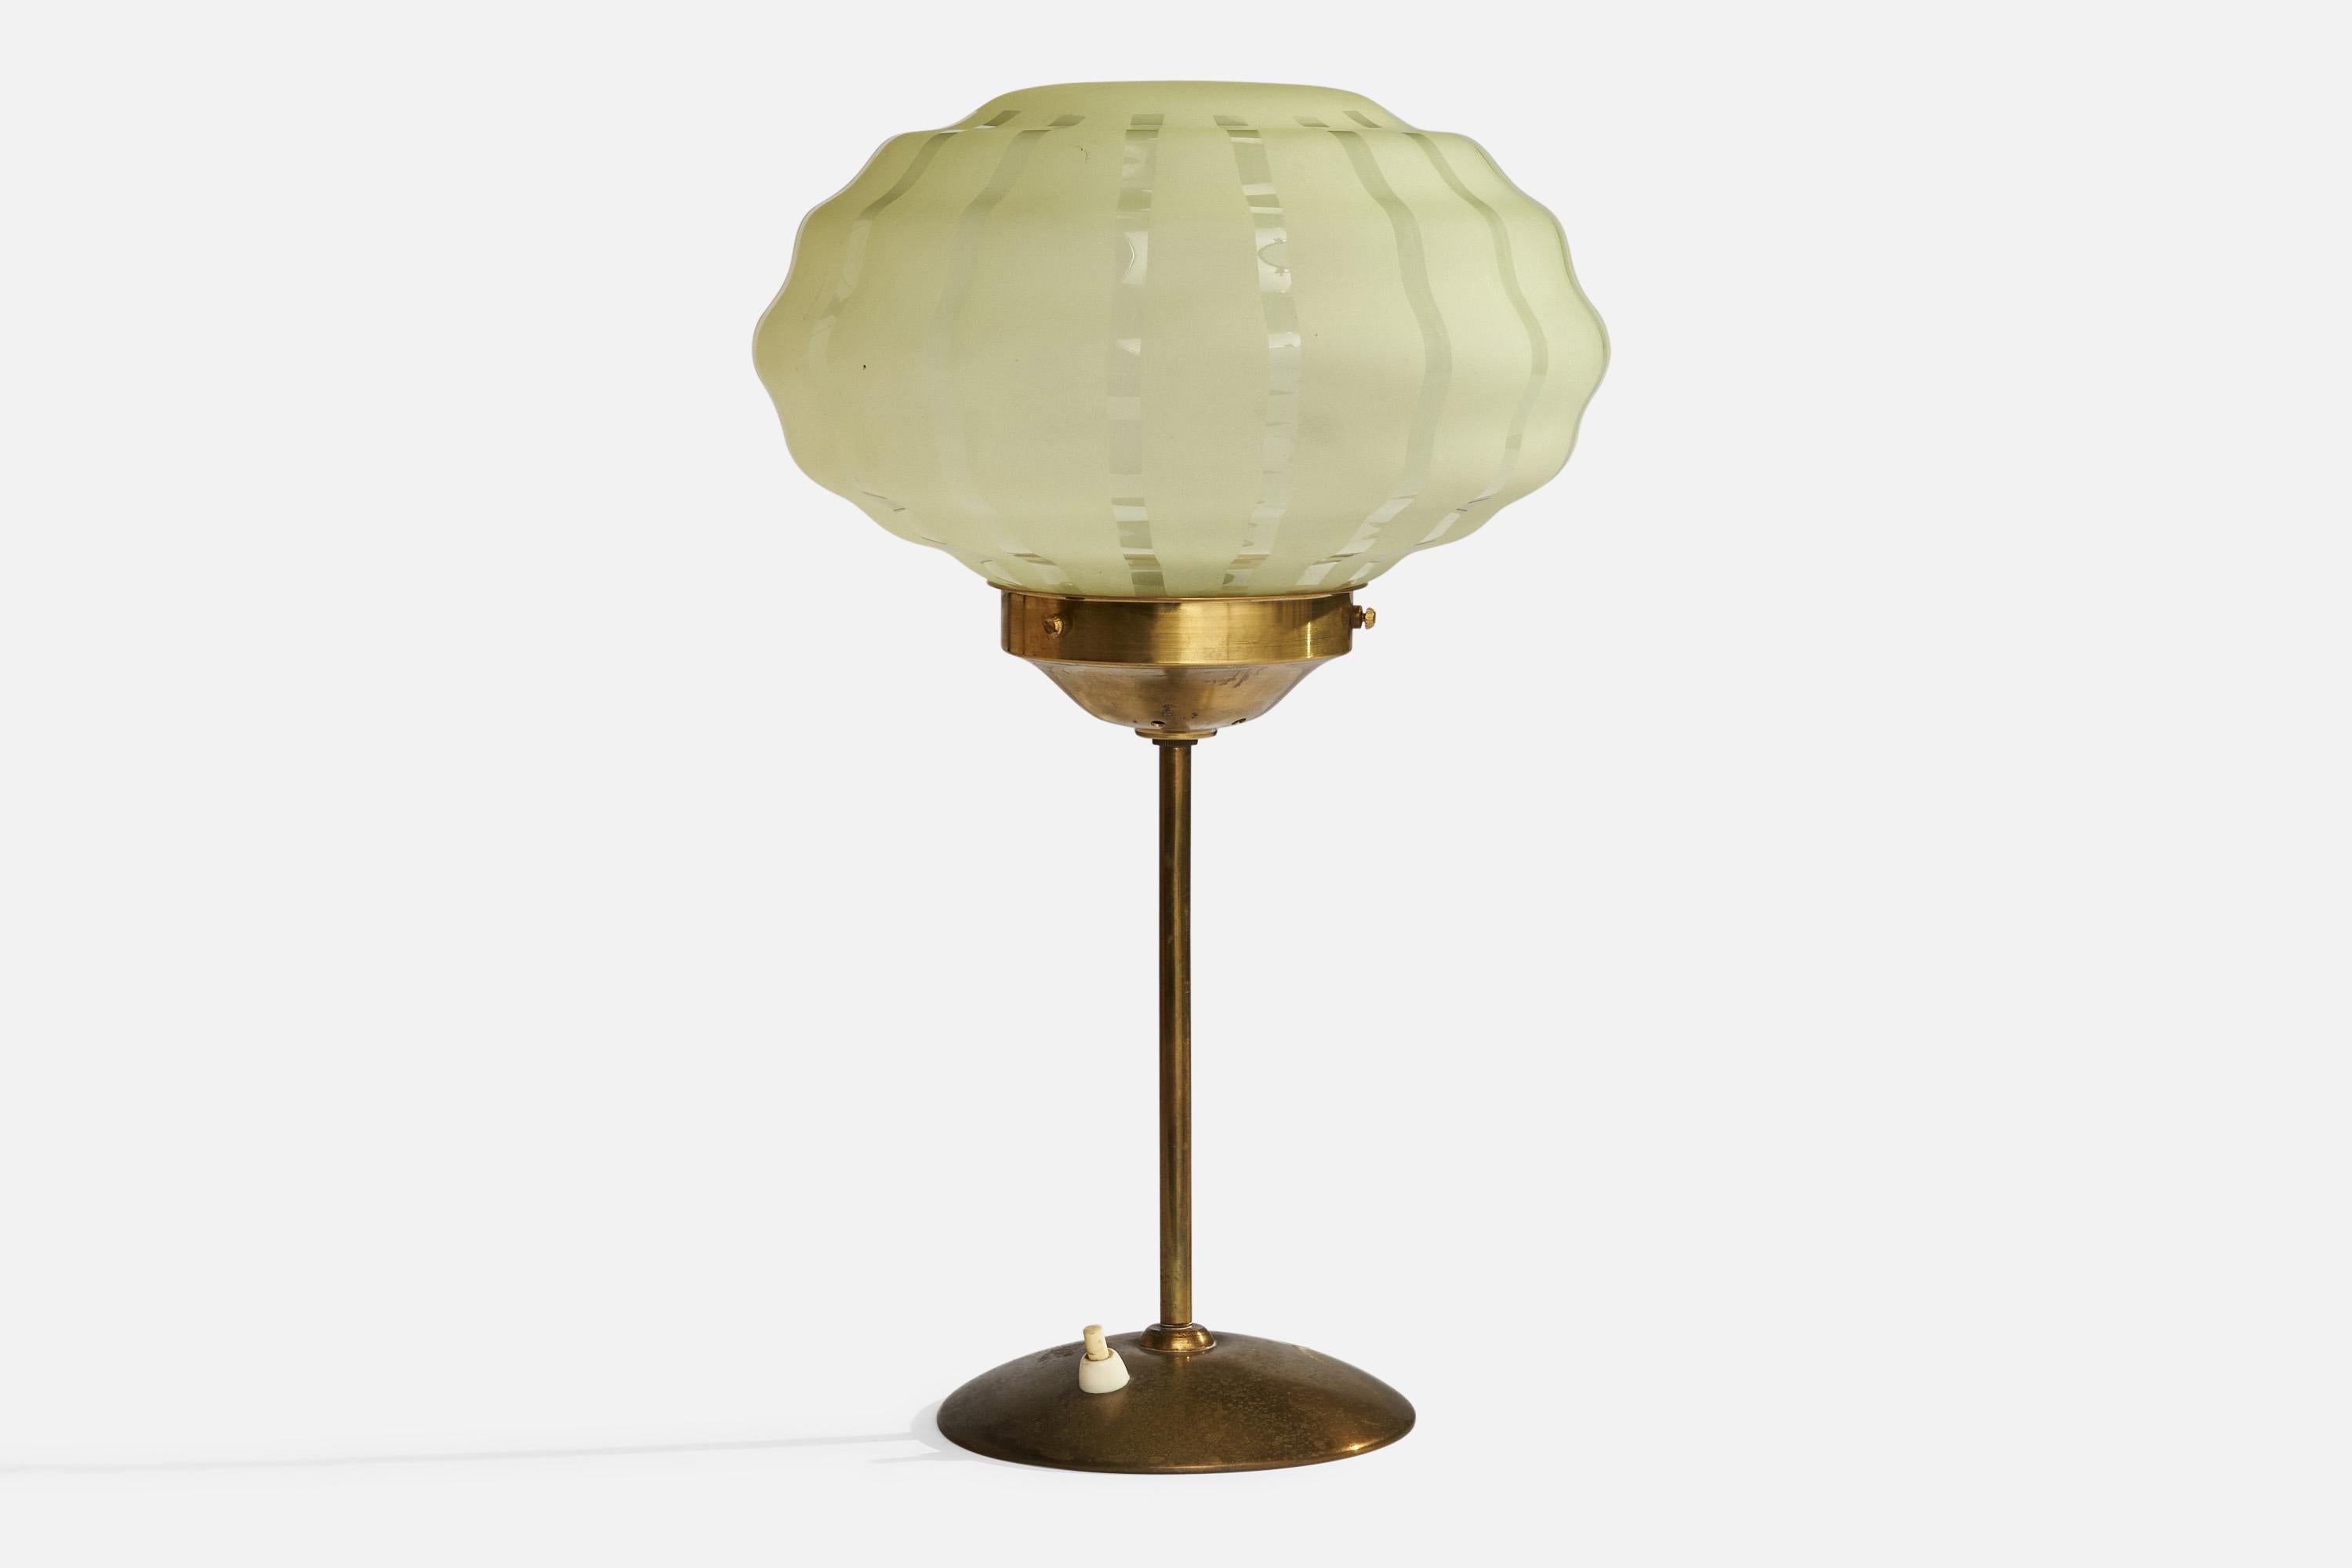 A brass and etched glass table lamp designed and produced in Sweden, c. 1960s.

Overall Dimensions (inches): 16”  H x 9.75” D
Stated dimensions include shade.
Bulb Specifications: E-26 Bulb
Number of Sockets: 1
All lighting will be converted for US